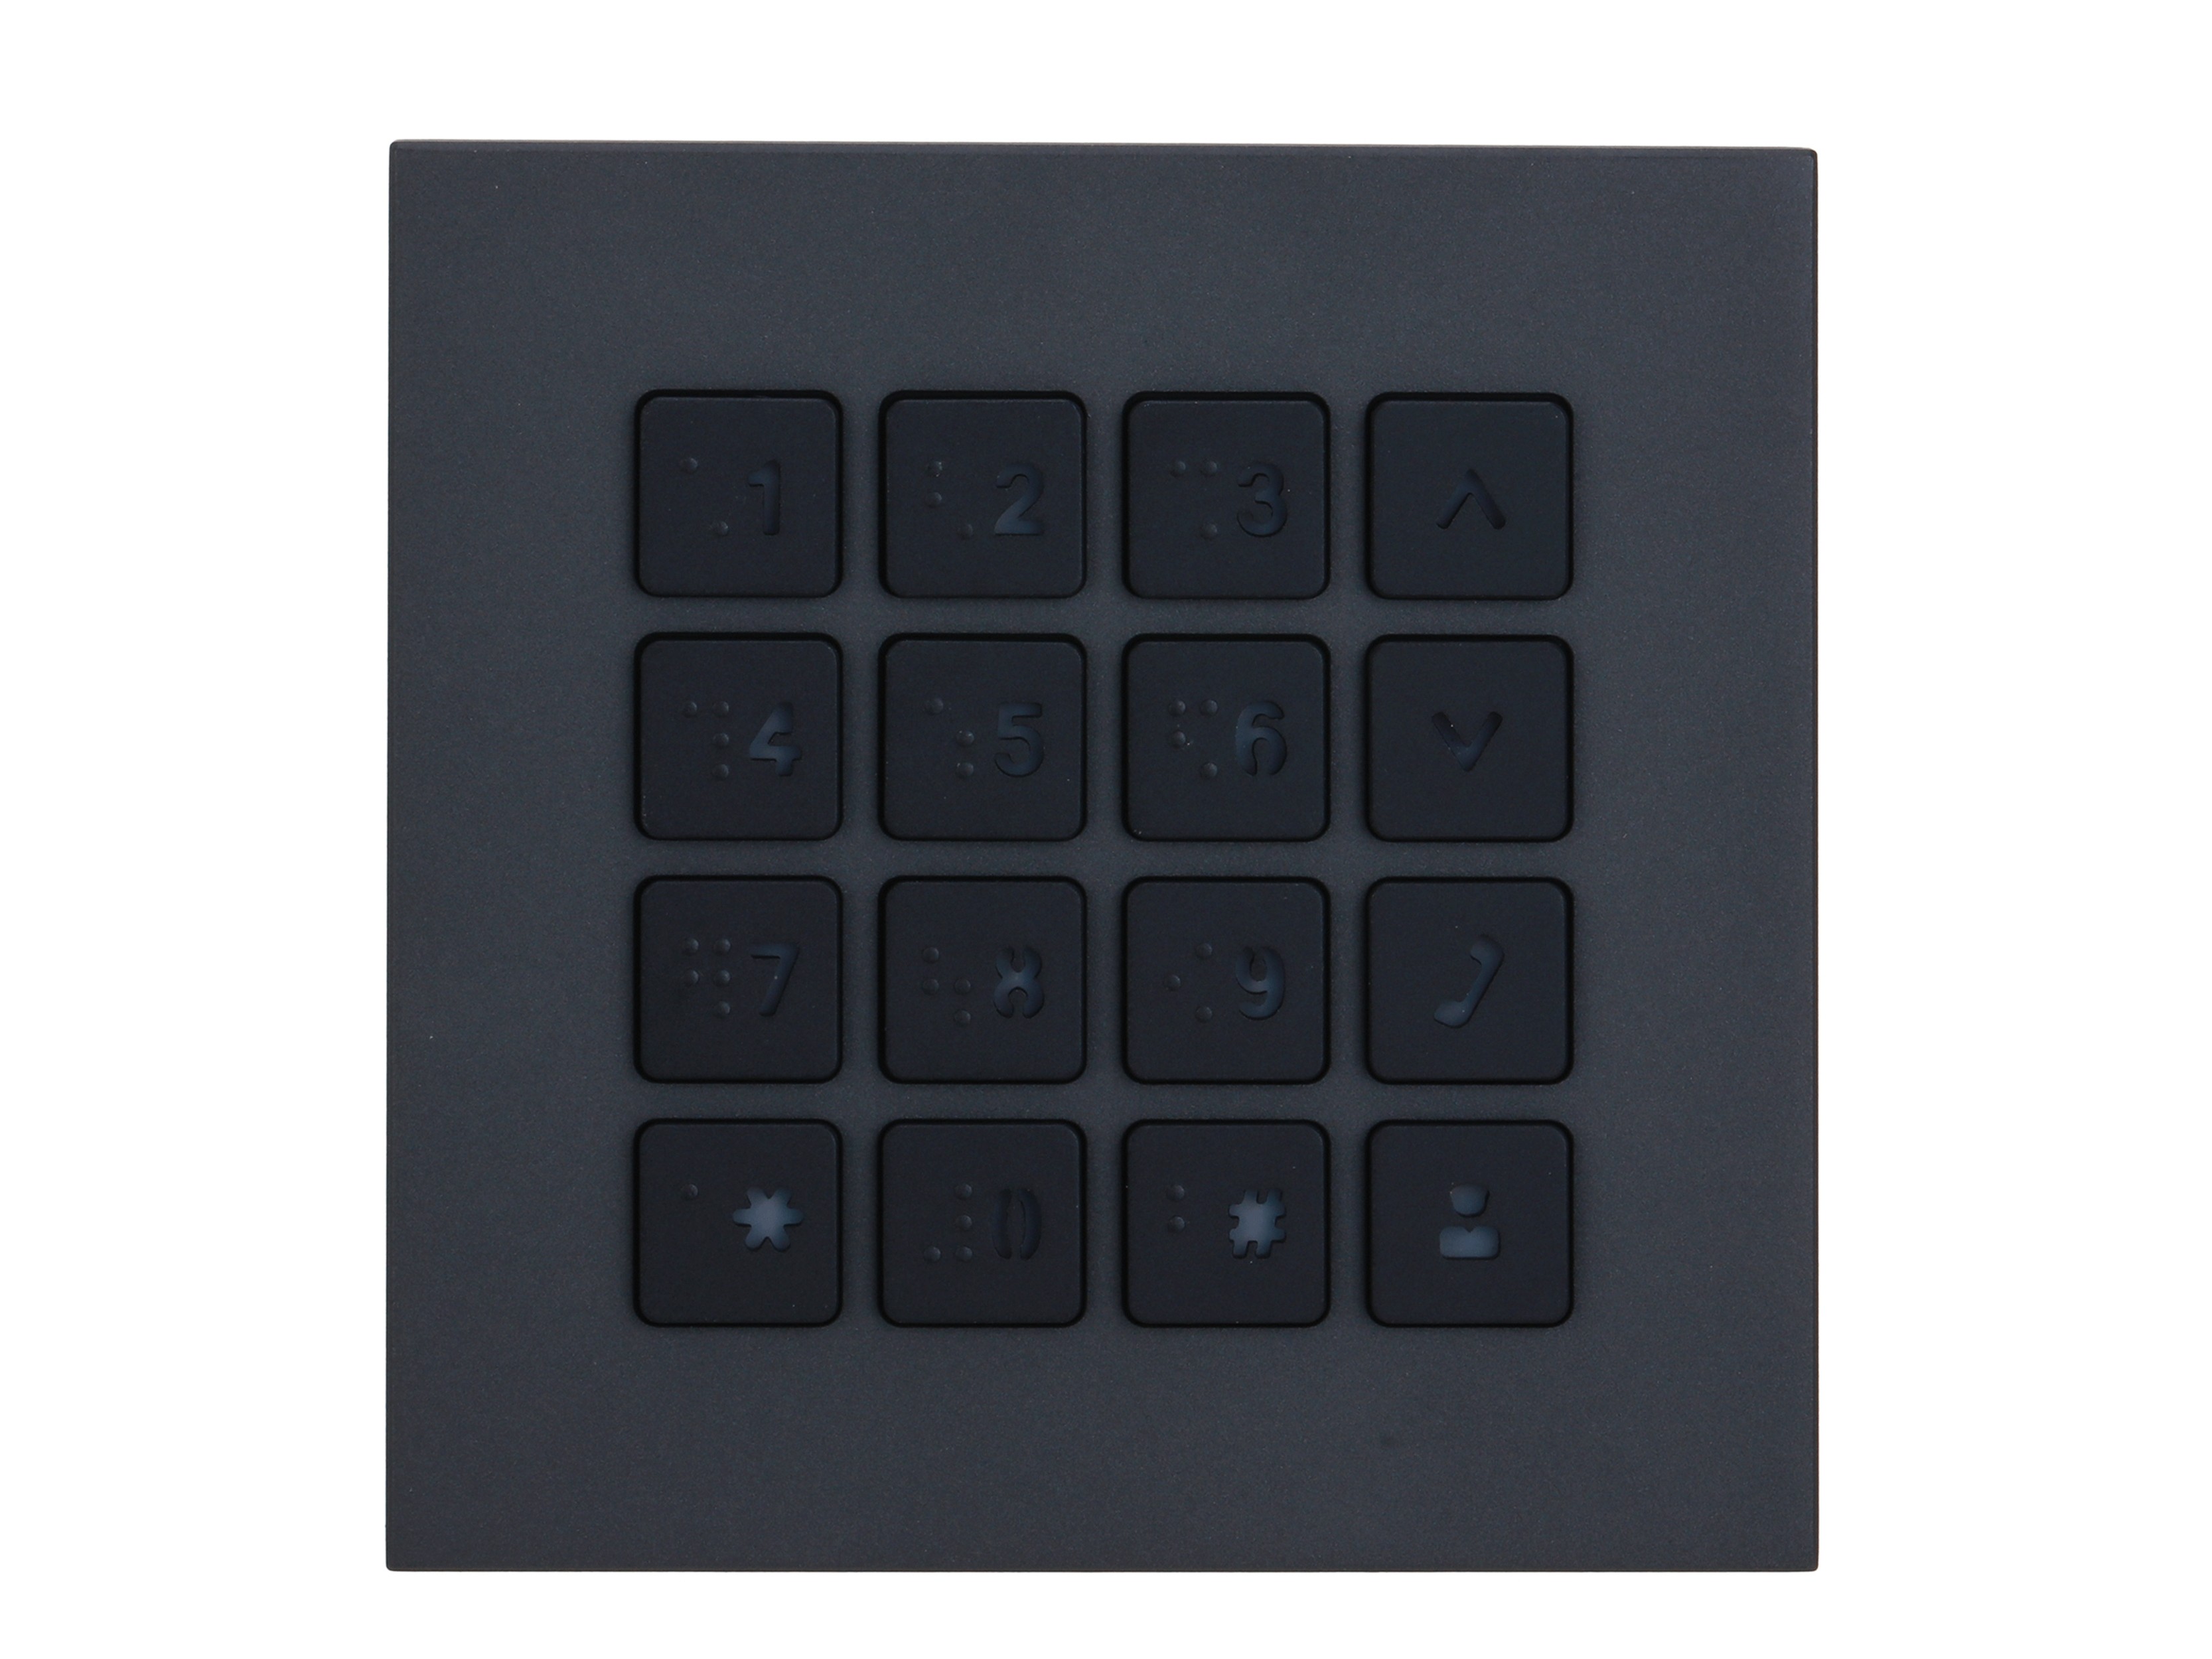 DAHUA SIP2.0 IP OR 2-WIRE INTERCOM KEYPAD MODULE BLACK APARTMENT/RESIDENTIAL MECHANICAL BUTTON METAL POWER BY BUS CONTROLLER